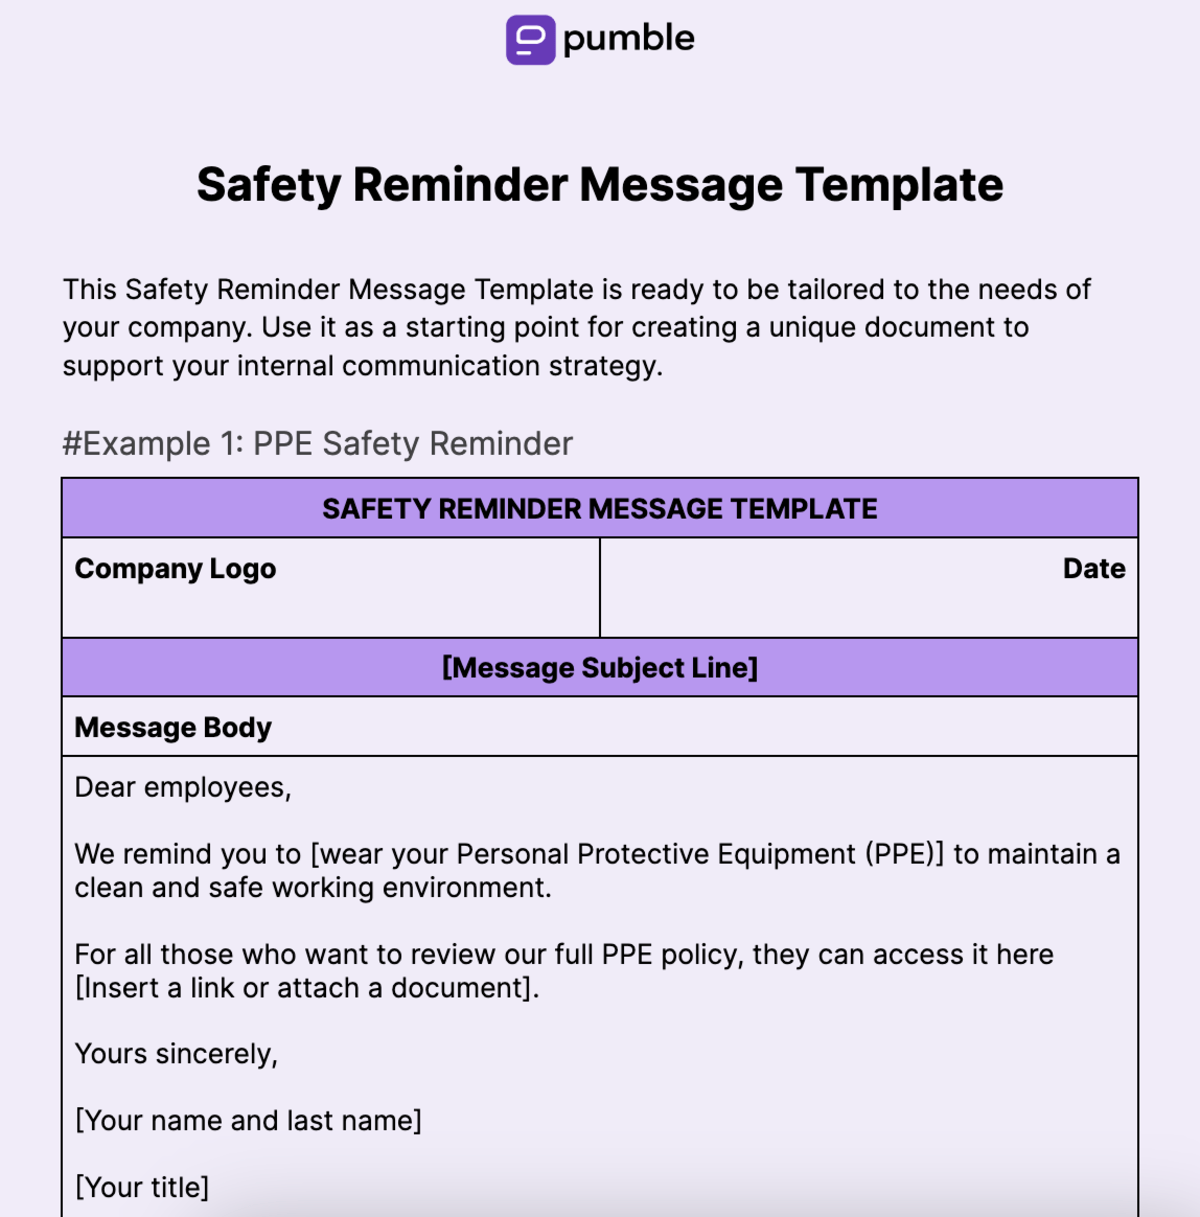 Safety Reminder Message Template